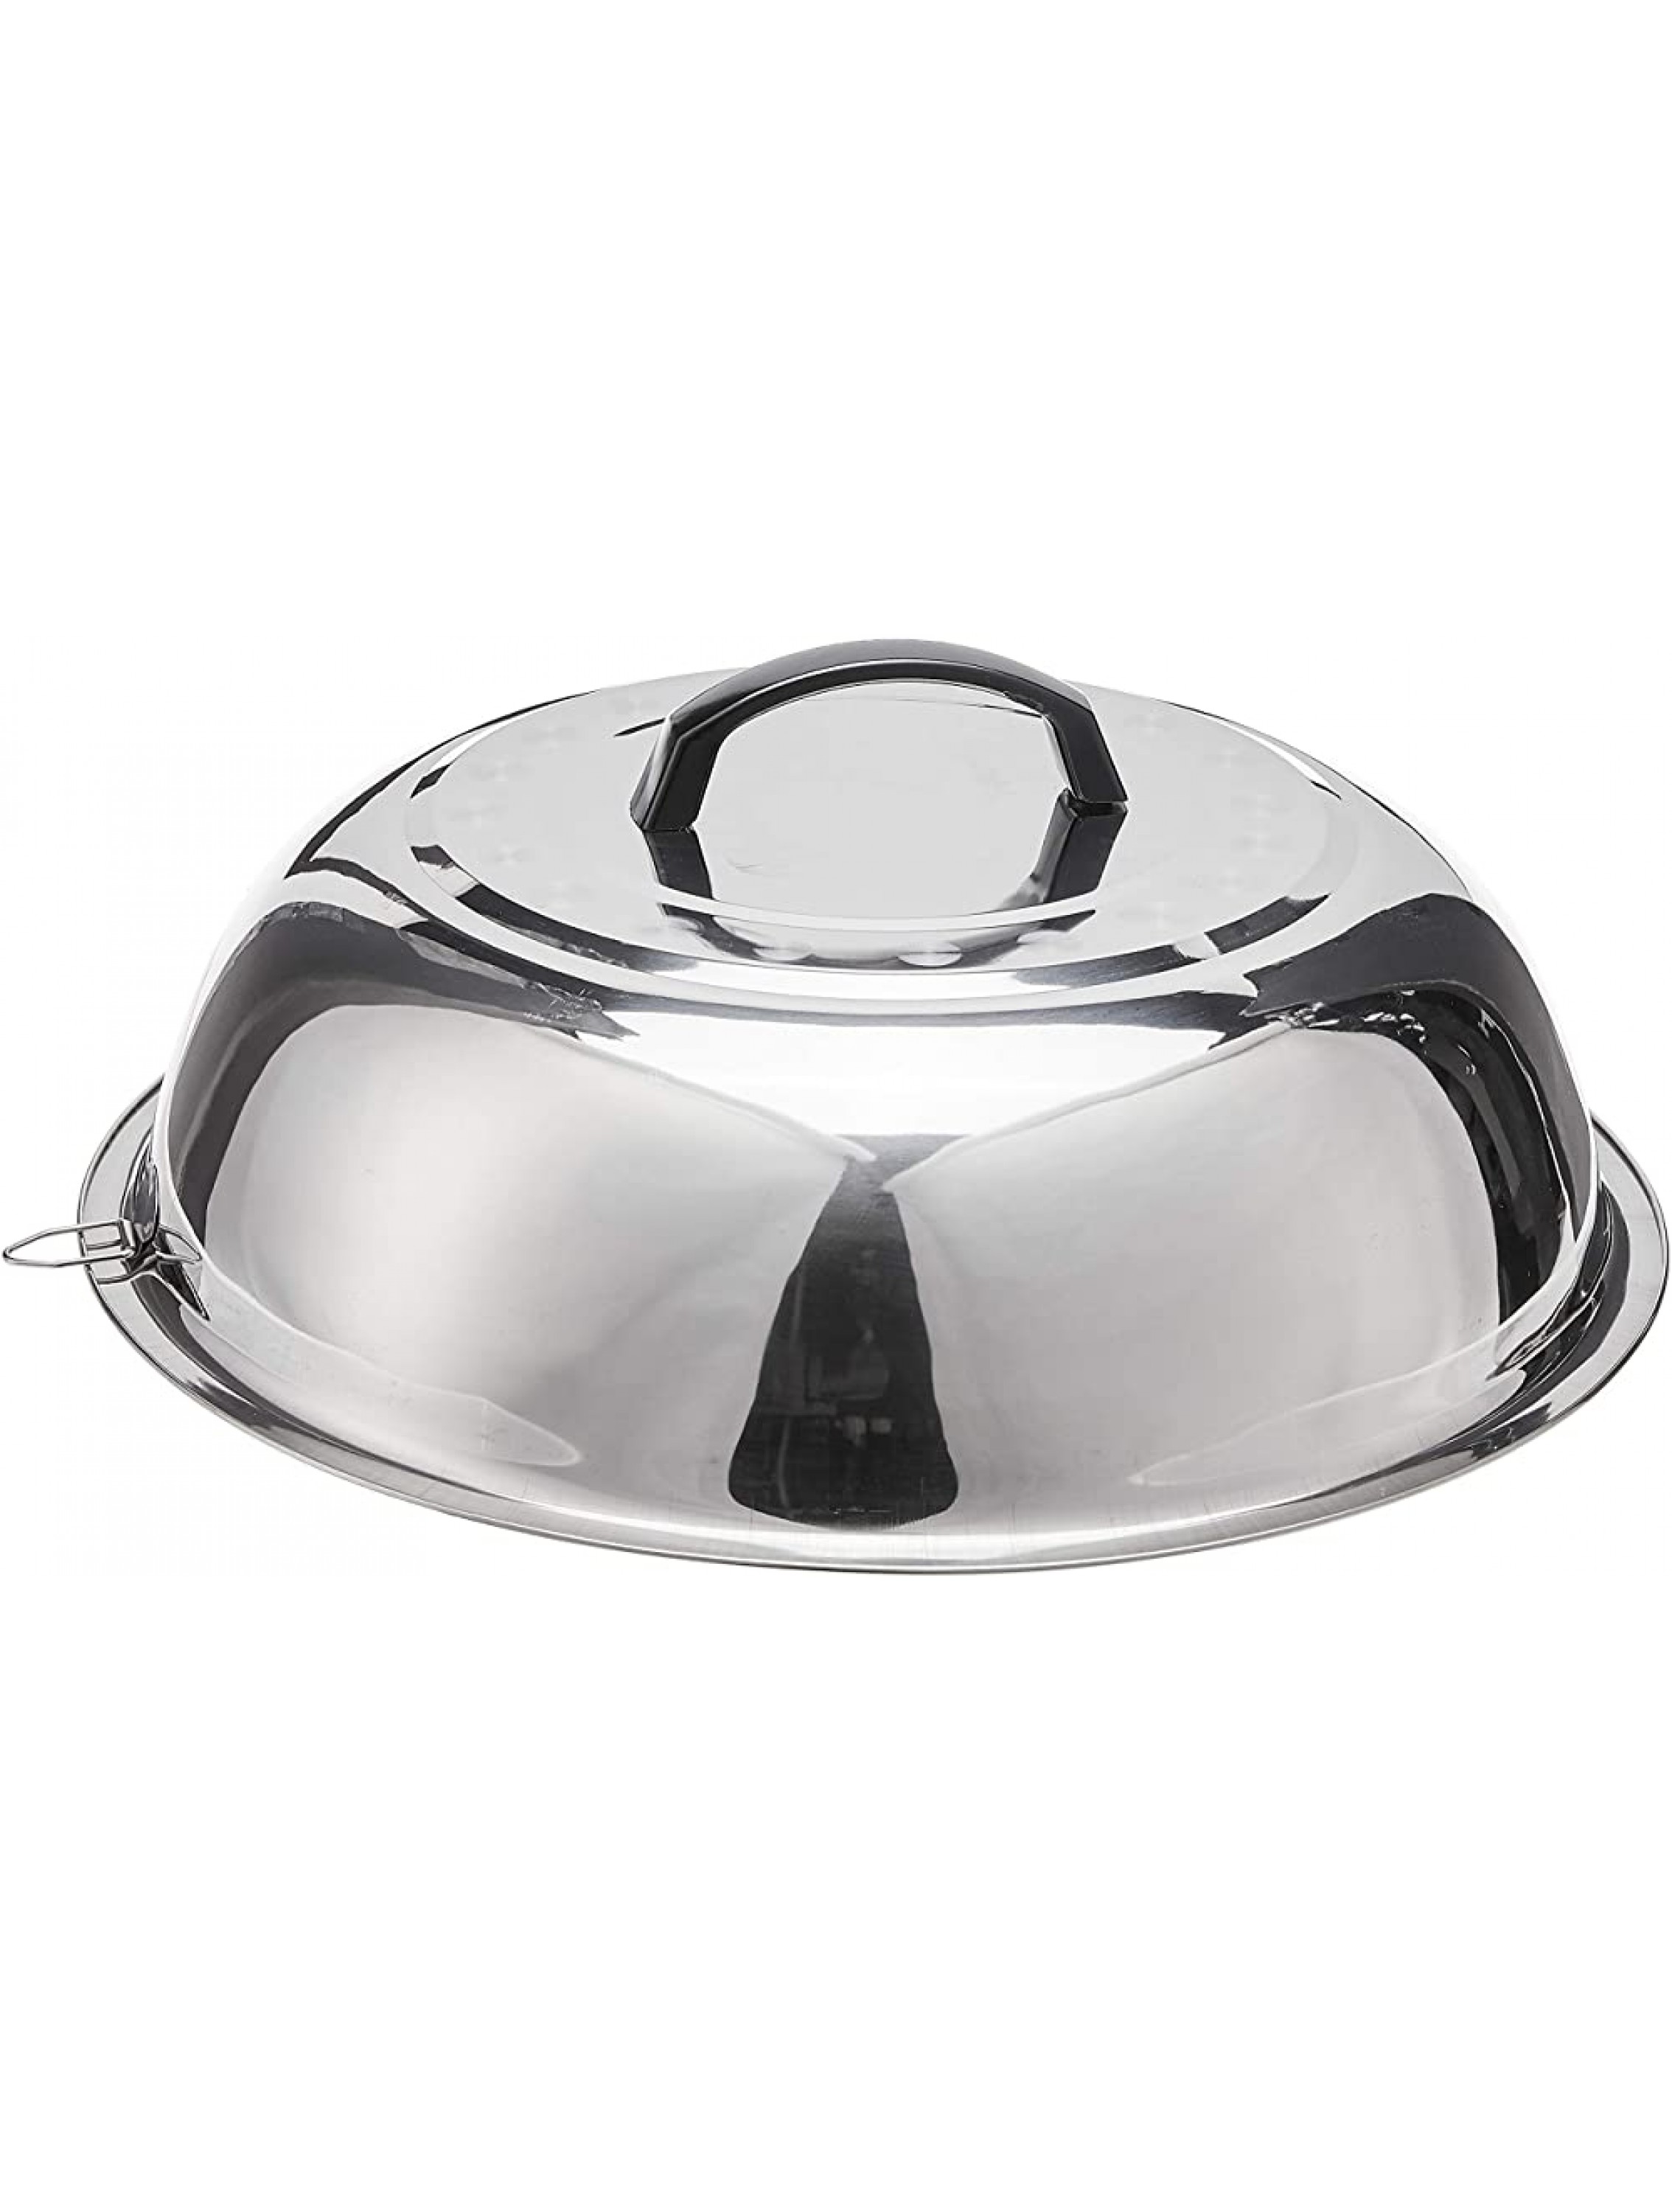 Winco WKCS-14 Stainless Steel Wok Cover 13-3 4-Inch - B0UVKFT8E